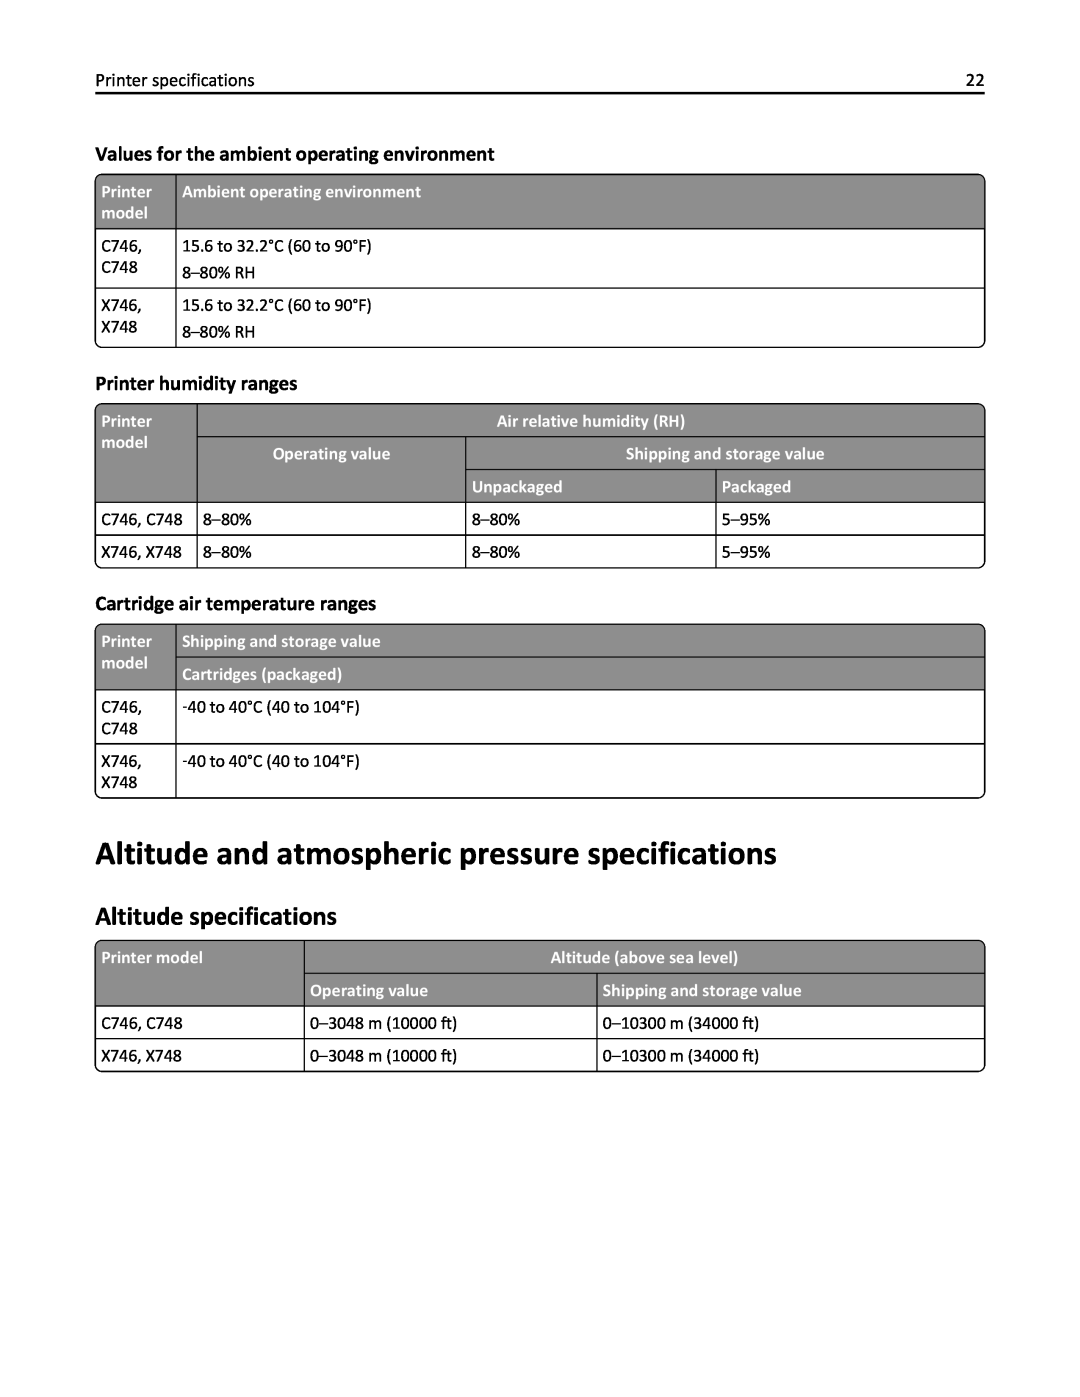 Lexmark 748de, 748dte Altitude and atmospheric pressure specifications, Altitude specifications, Printer humidity ranges 